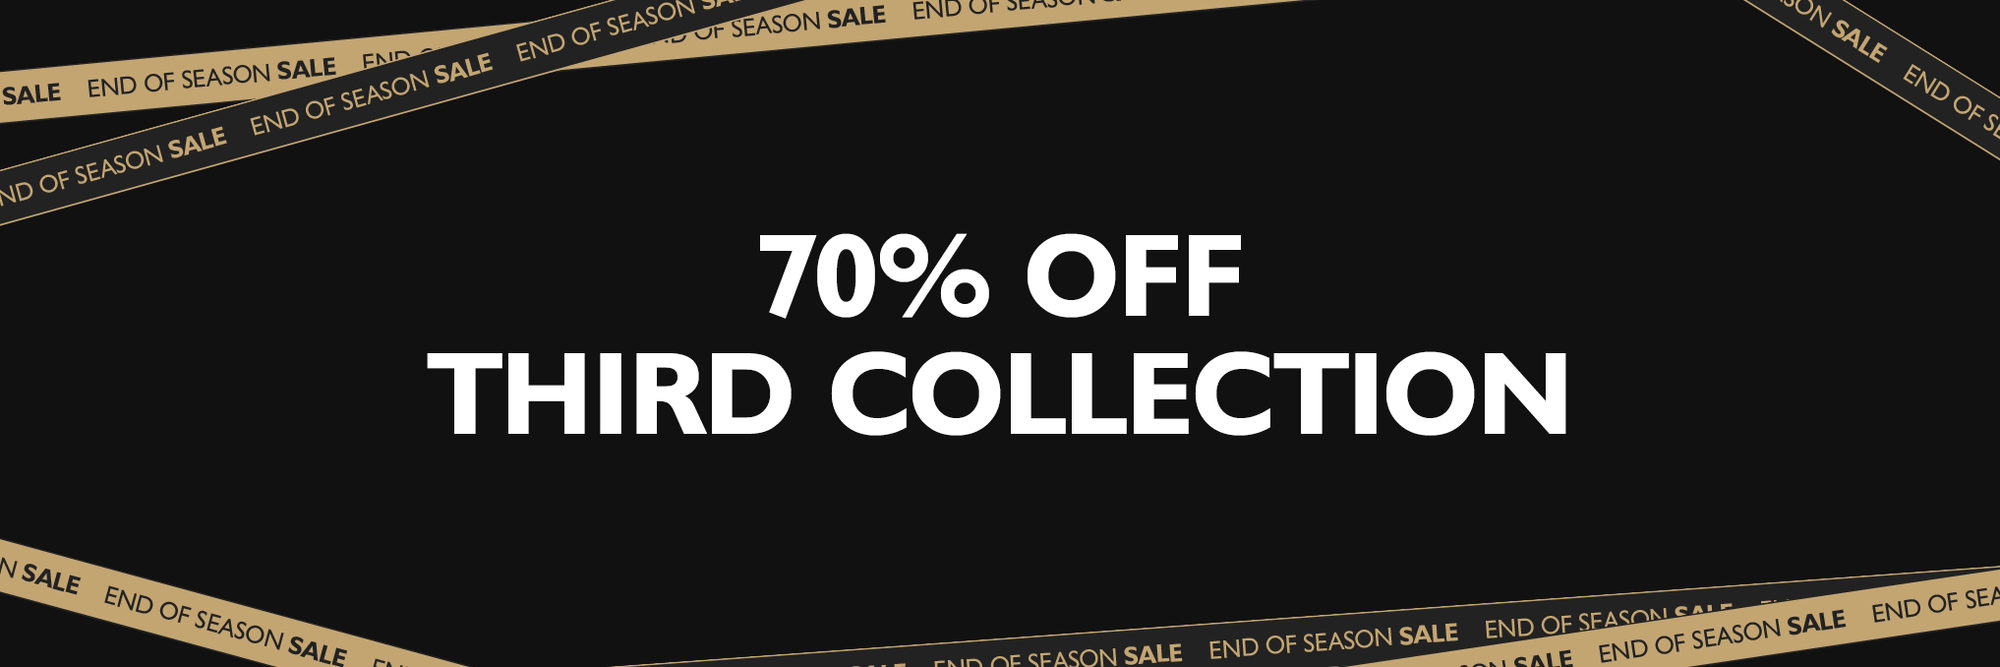 23/24 End of Season Sale - 70% off Third Collection